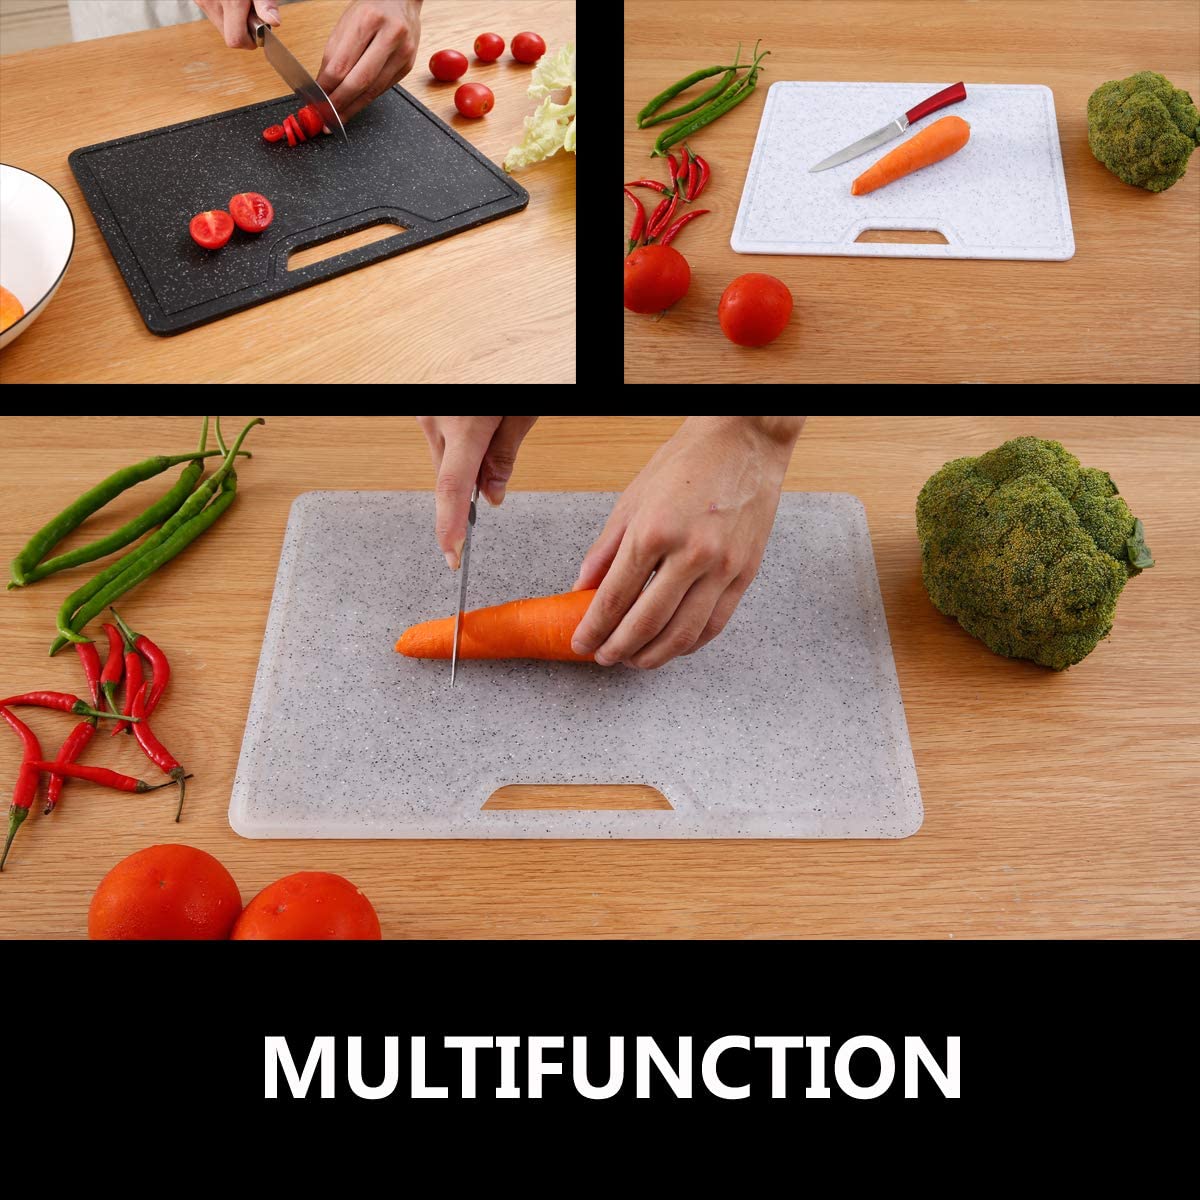 Plastic Cutting Board Kitchen ,Dishwasher Safe, Juice Grooves, Marble Appearance, Large Thick Boards, Food Safe Material, Non-Porous